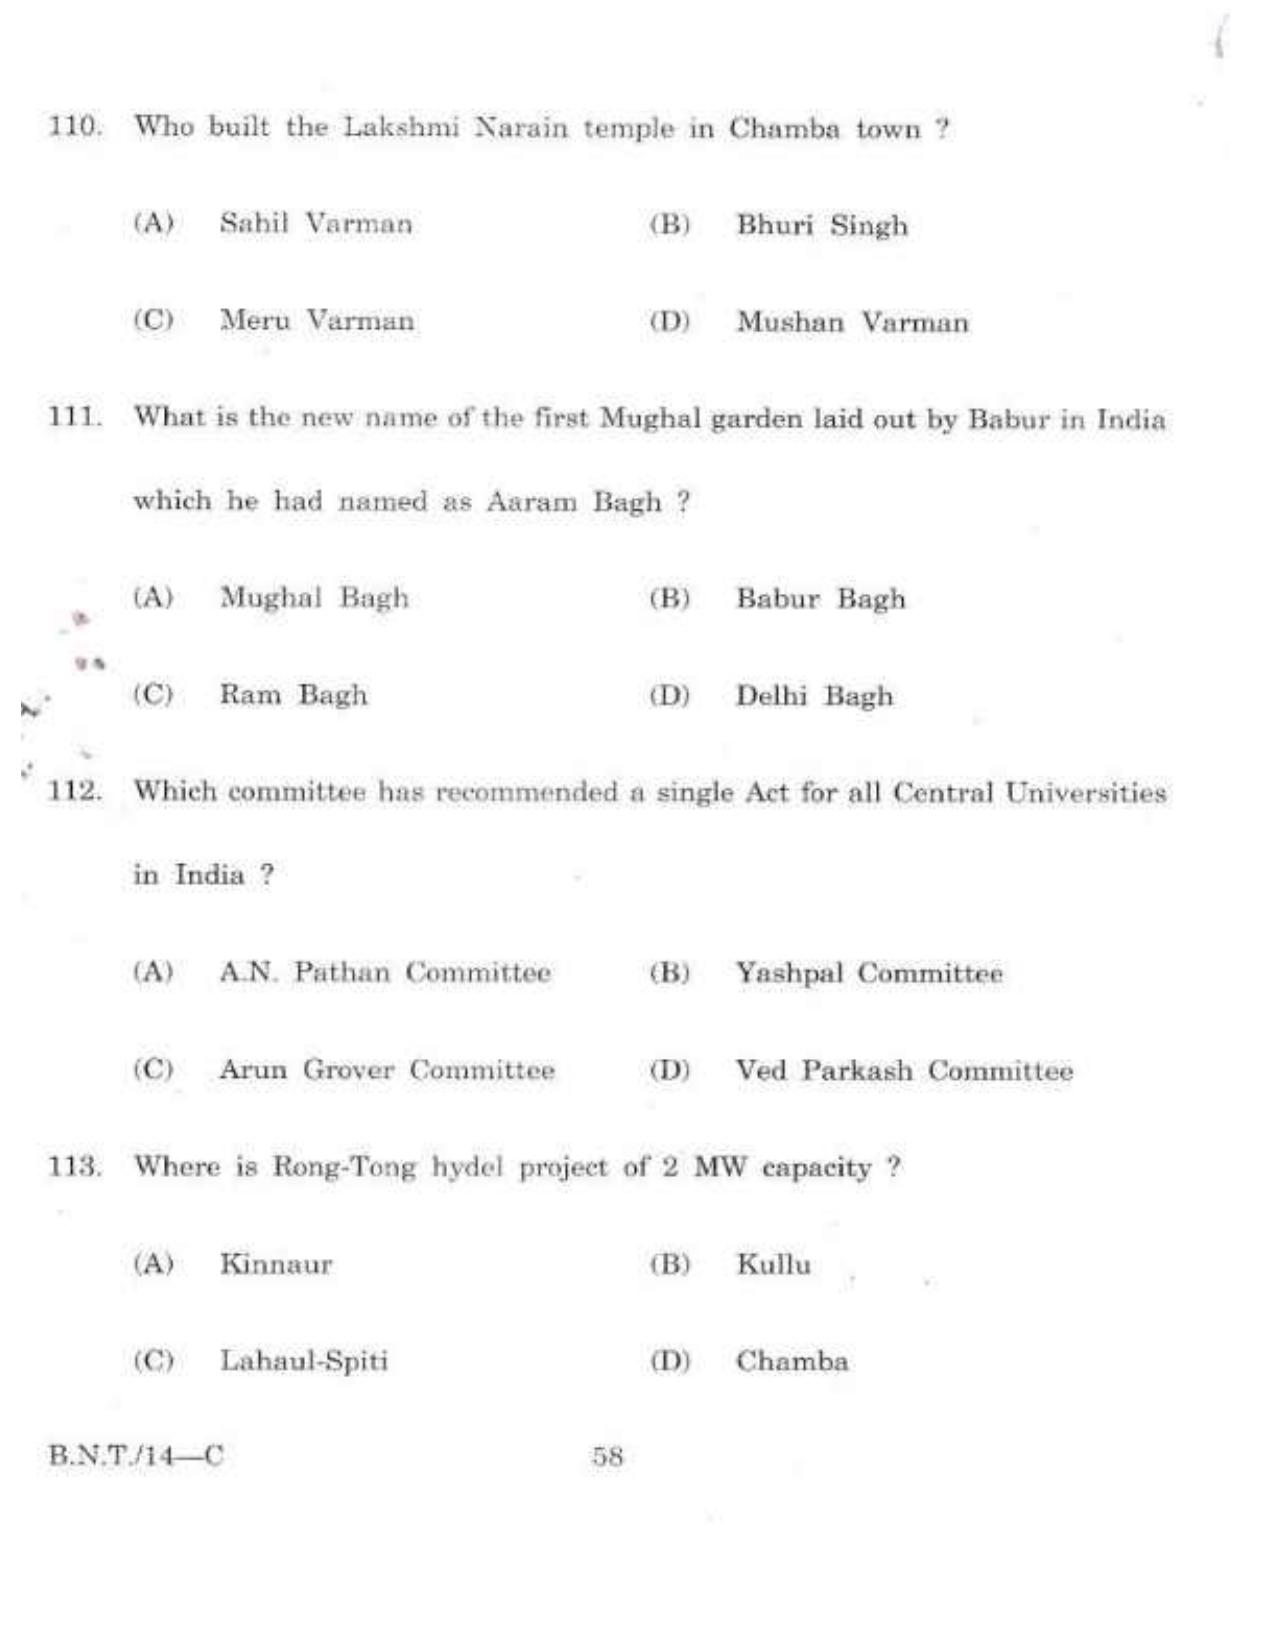 BSMFC Recovery Agent Old Question Papers for General Knowledge - Page 58